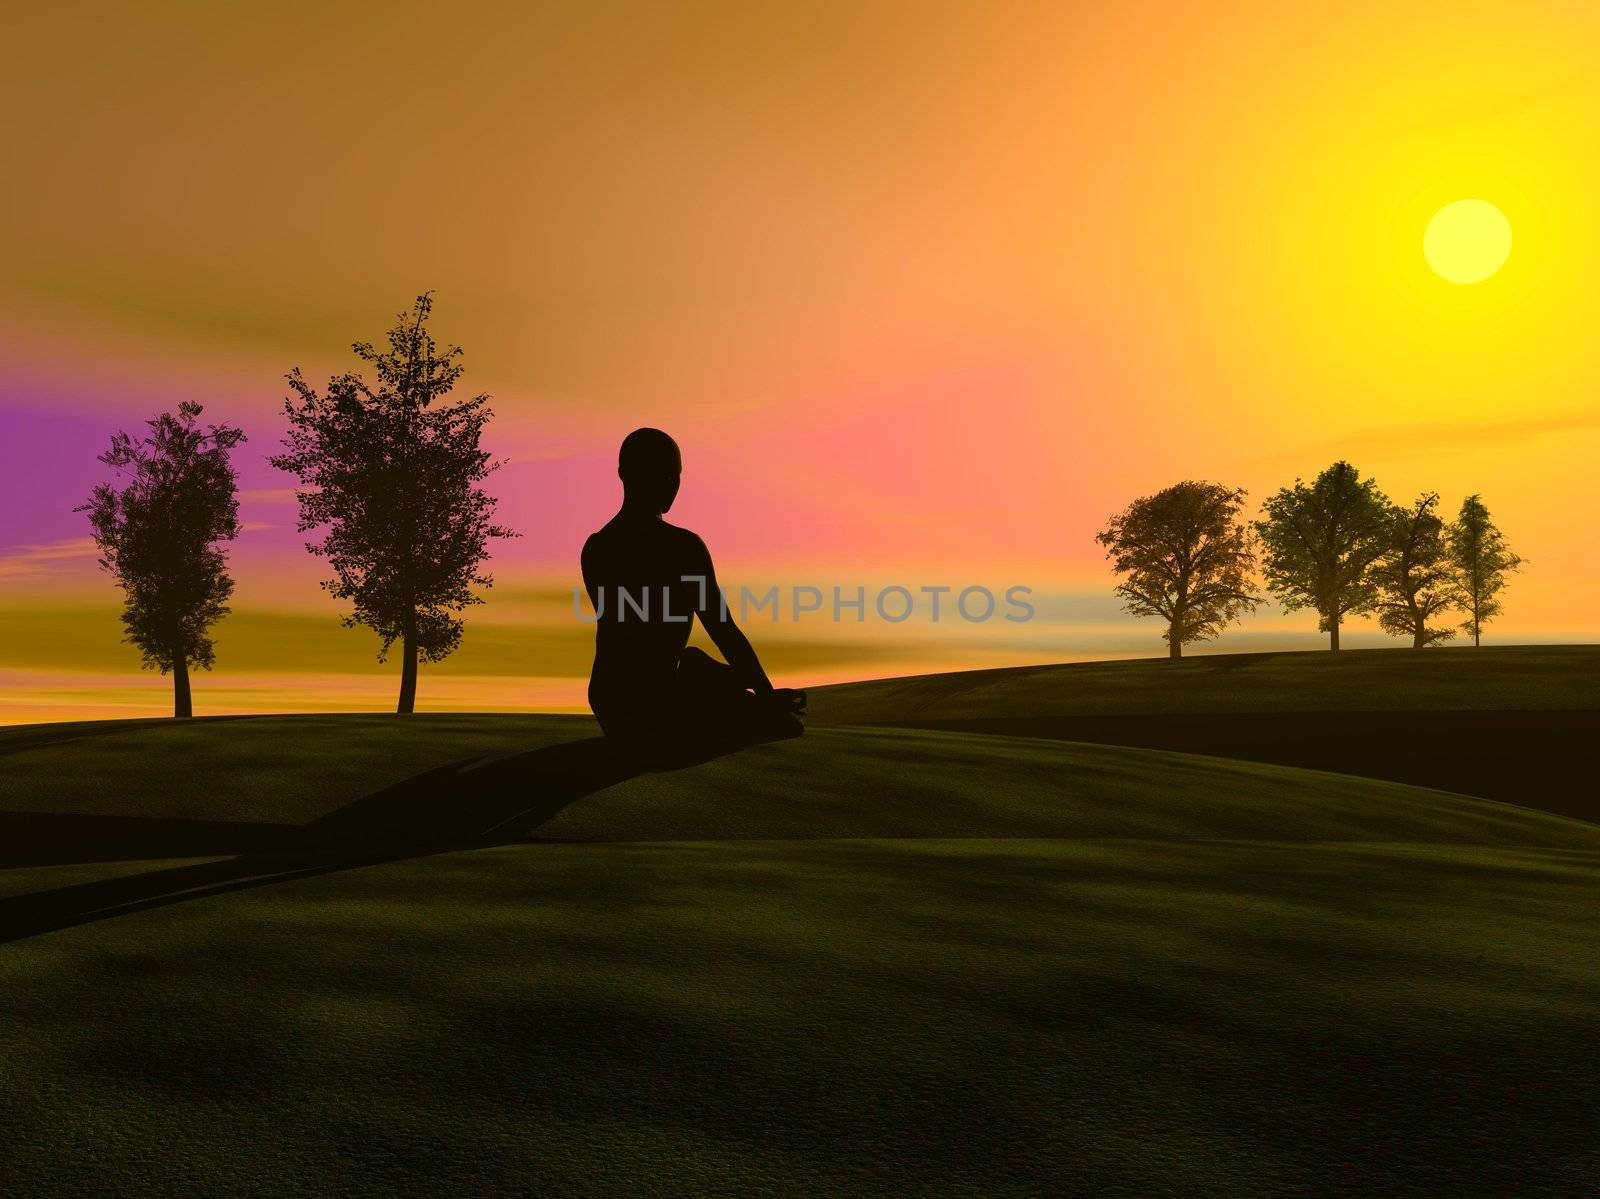 Shadow of a man meditating in the nature, on the grass next to trees by sunset